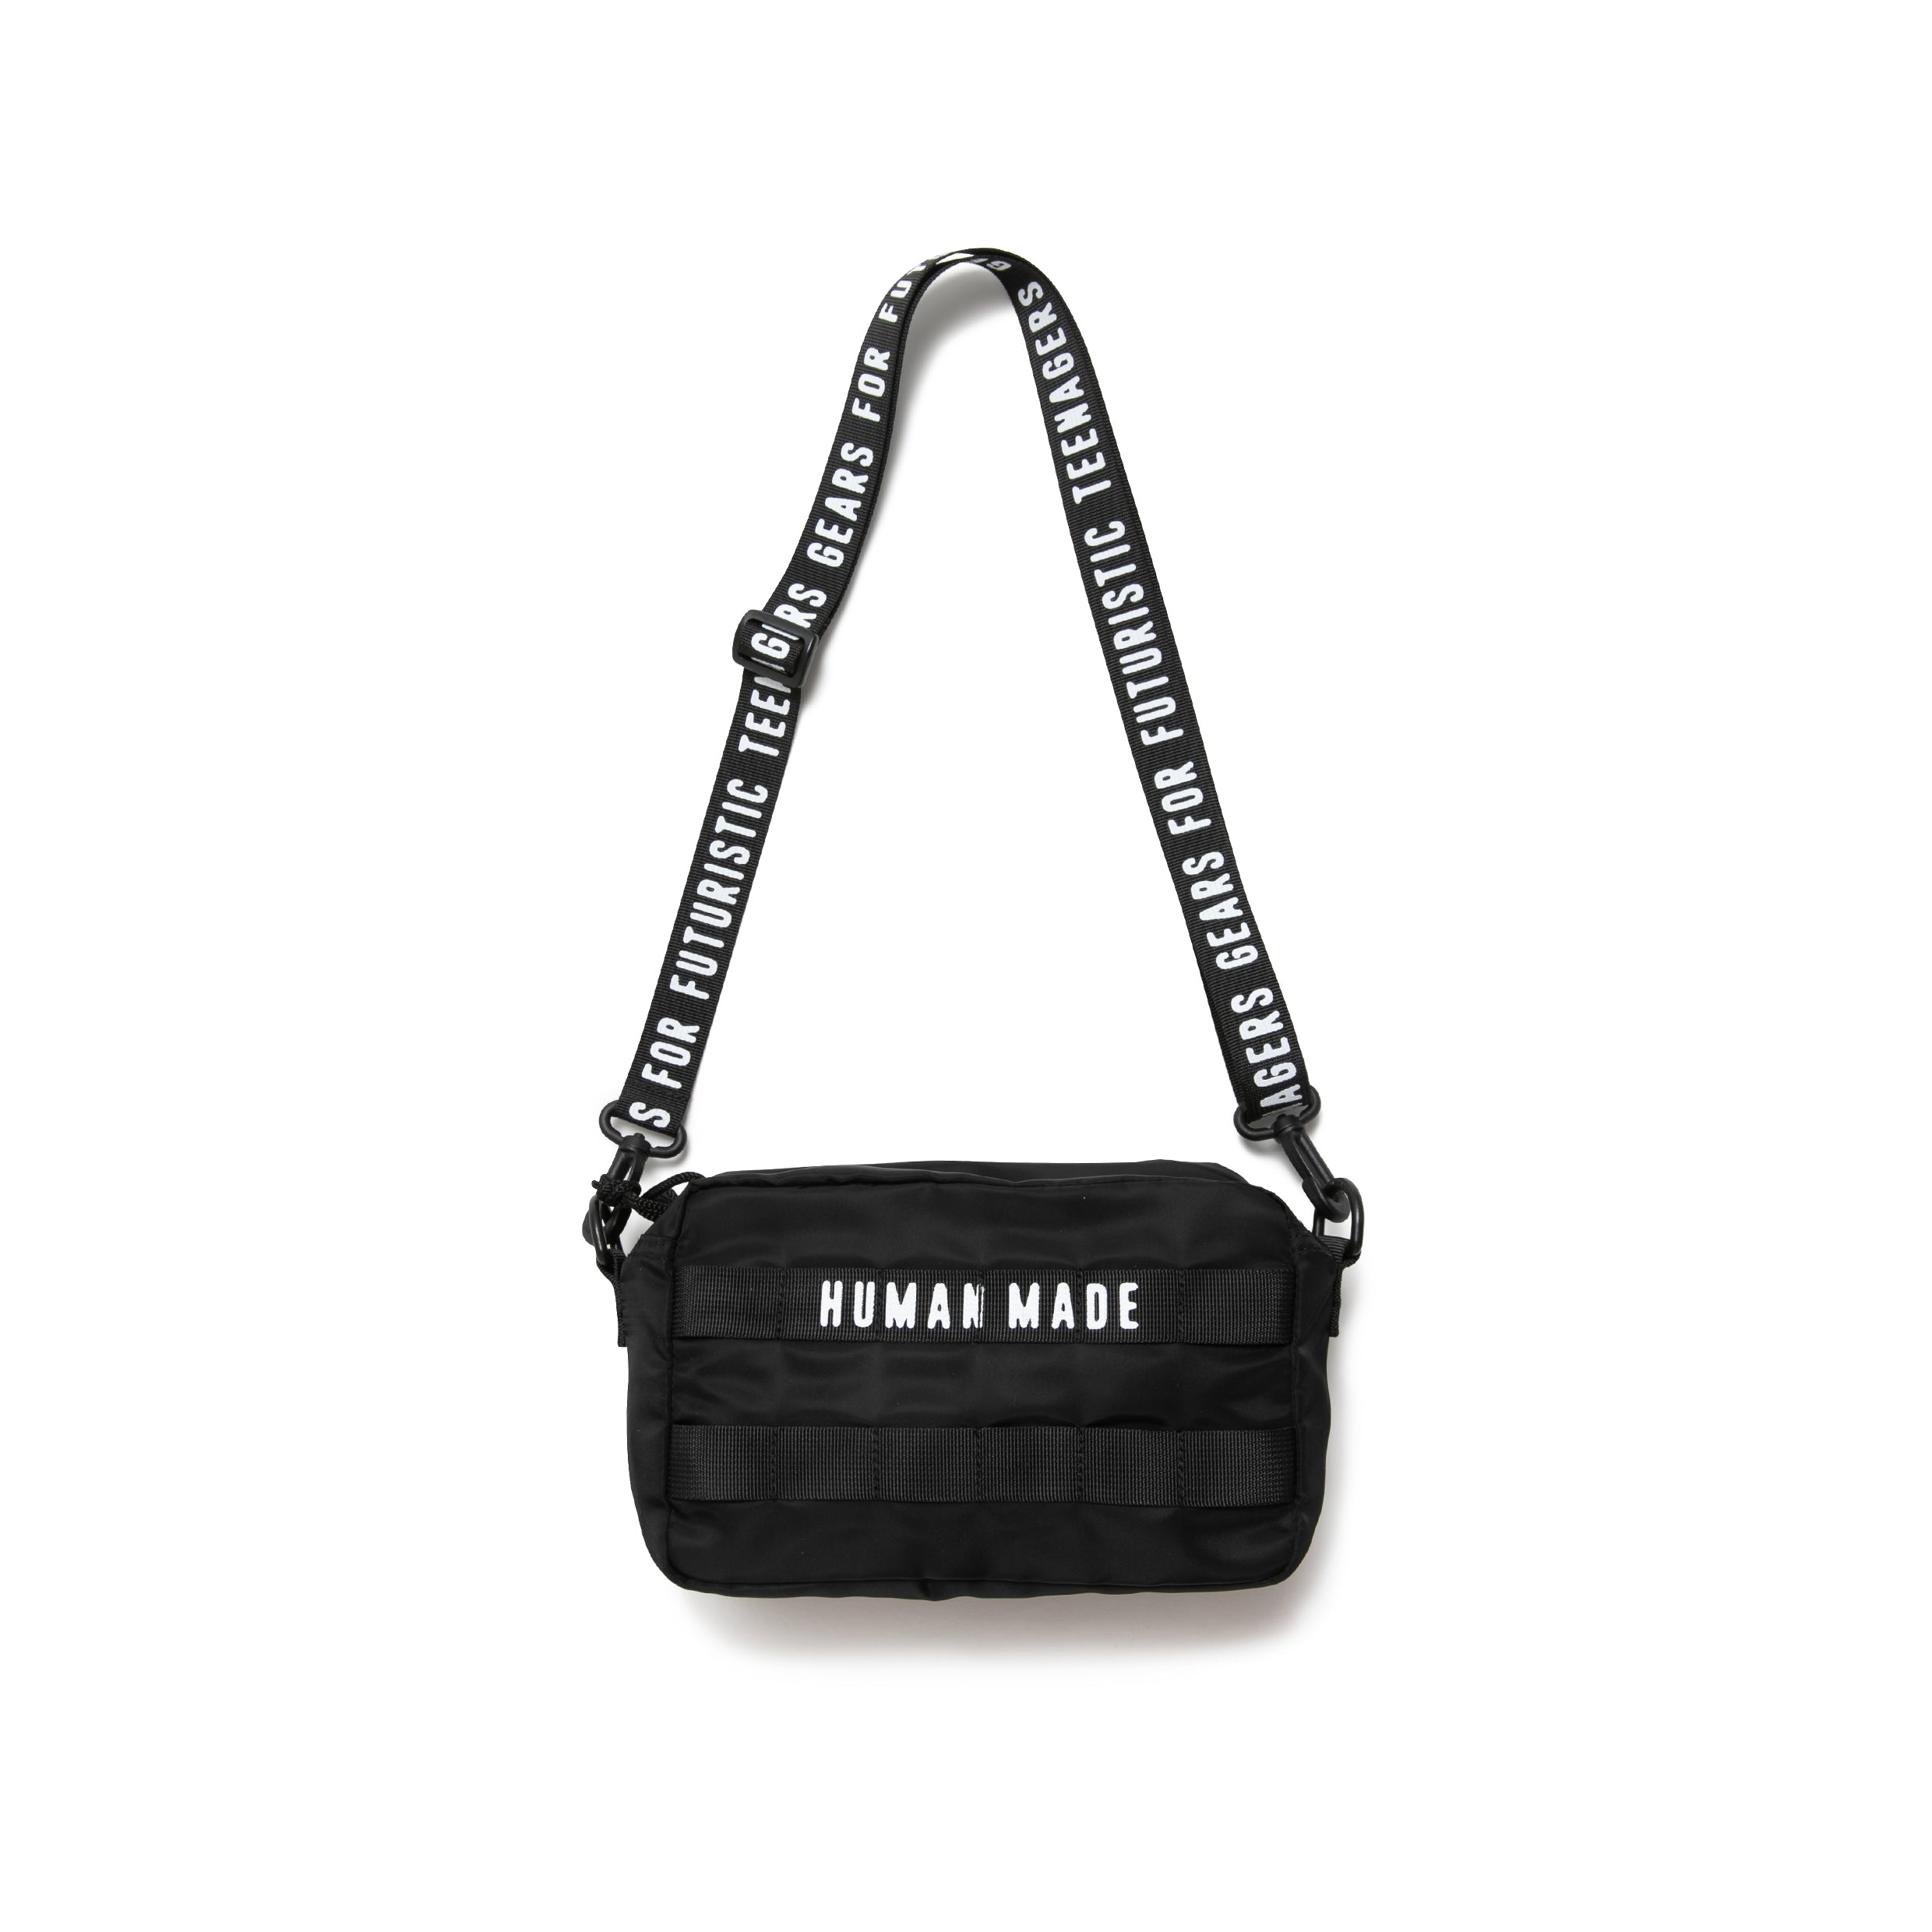 human made military pouch #1 (black) - a.plus store